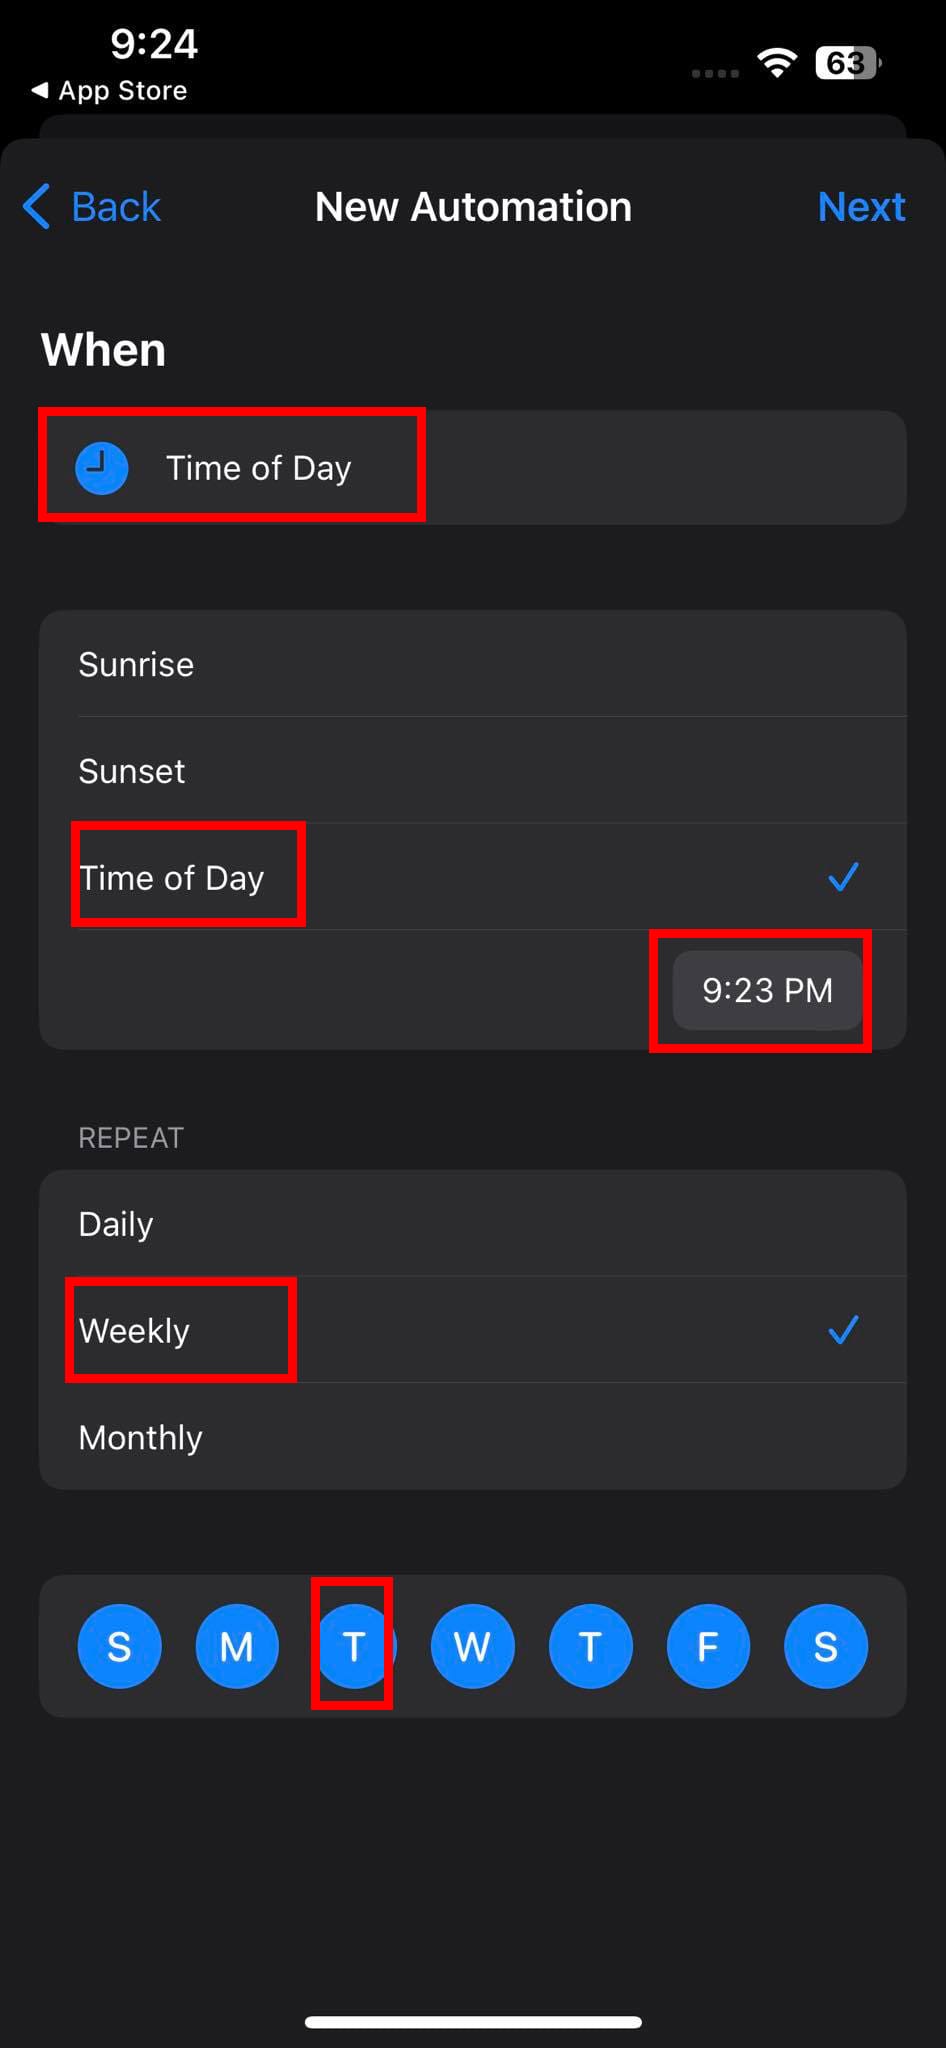 Modifying time and date for automation on Time of day